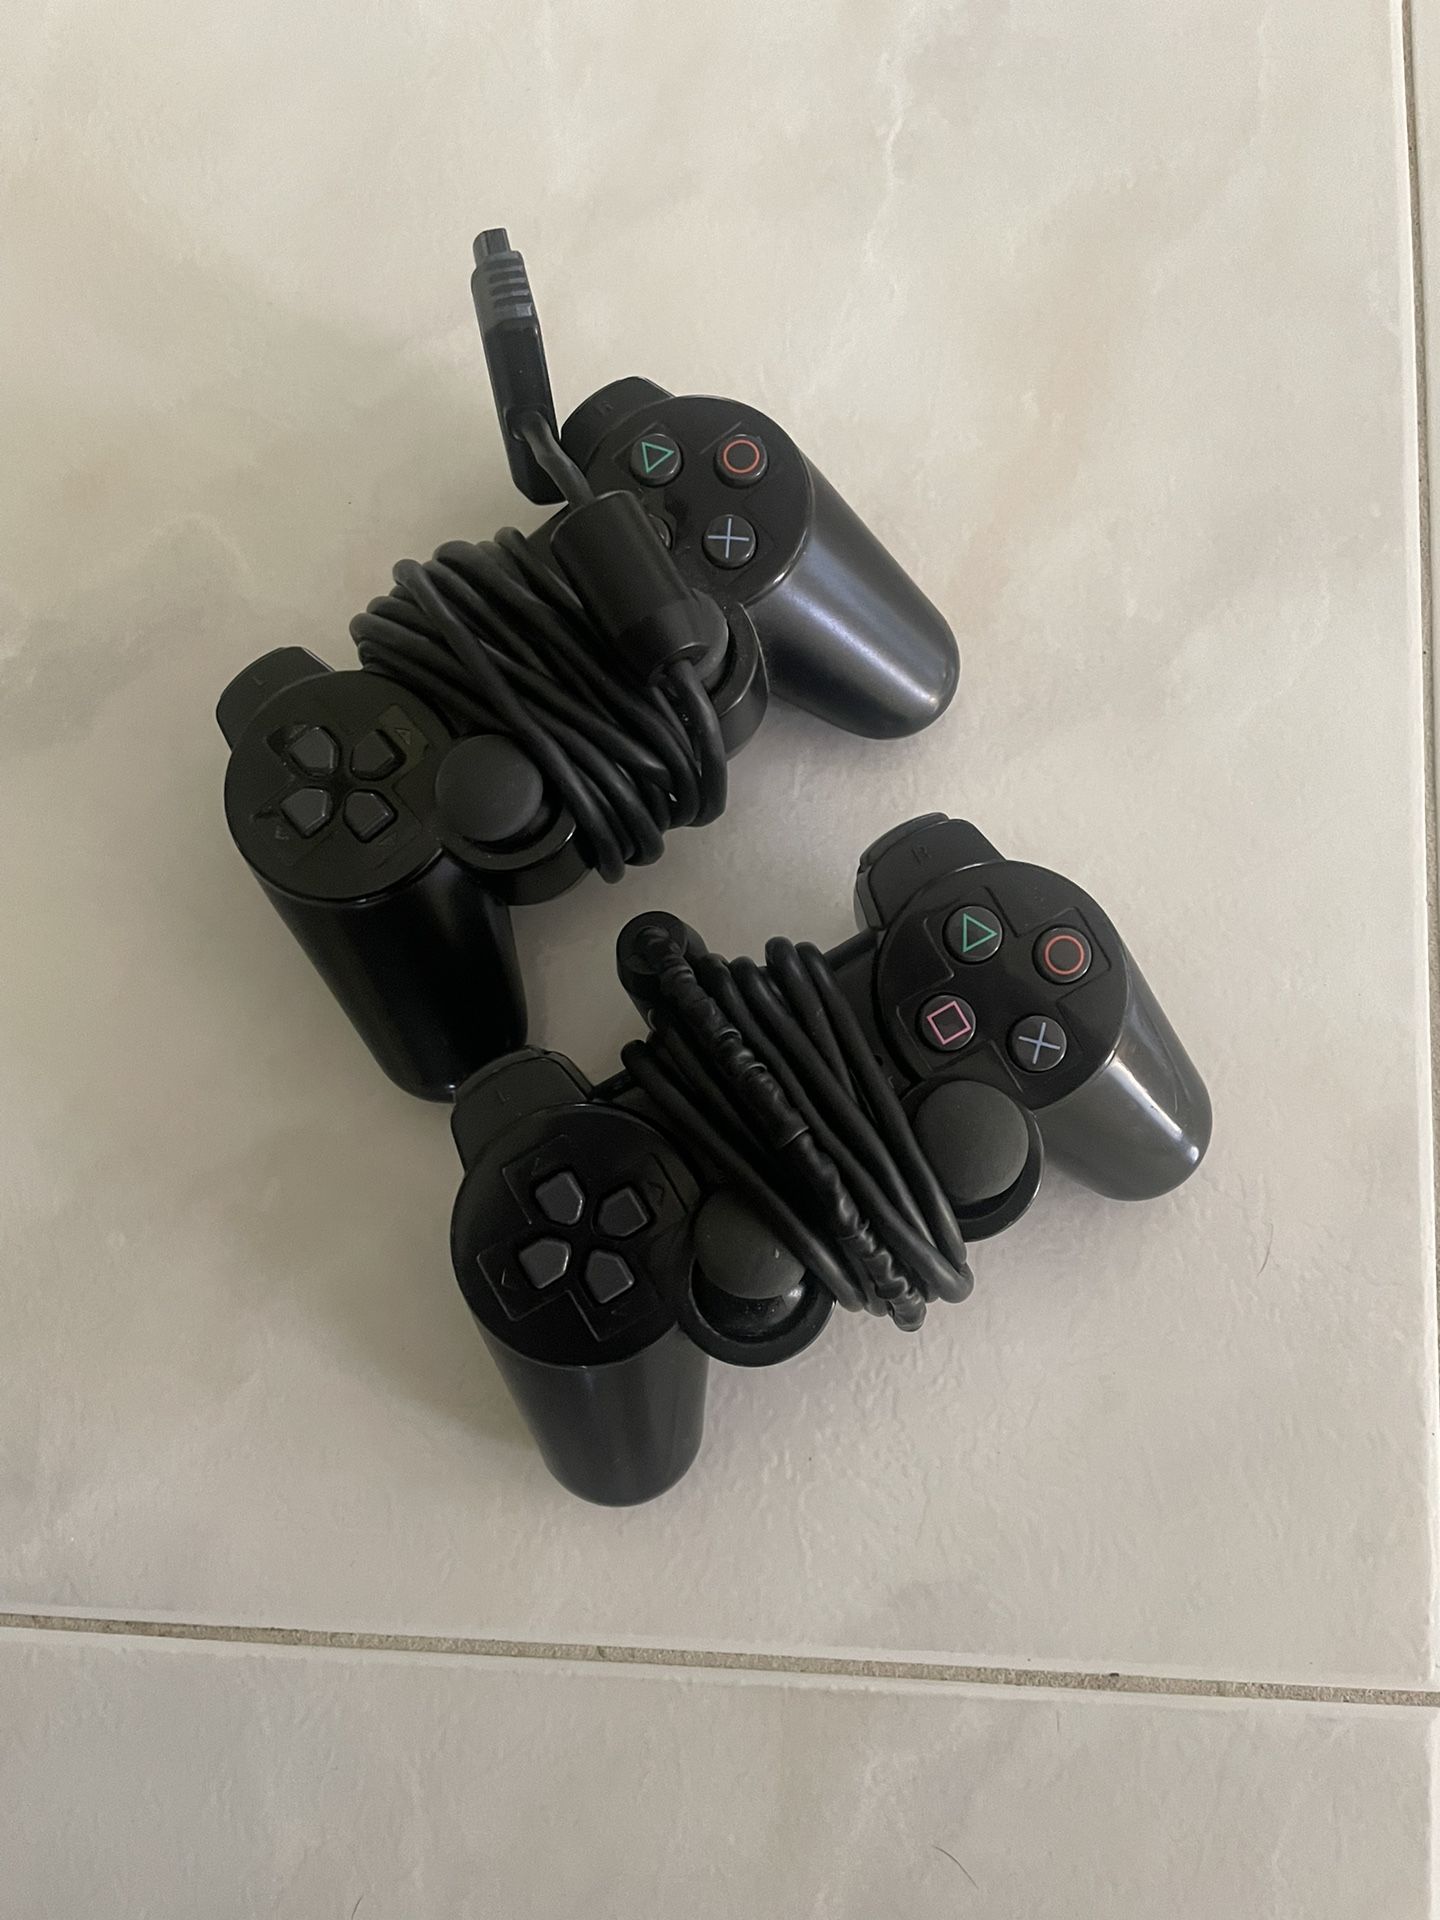 Non-working PS2 Controllers